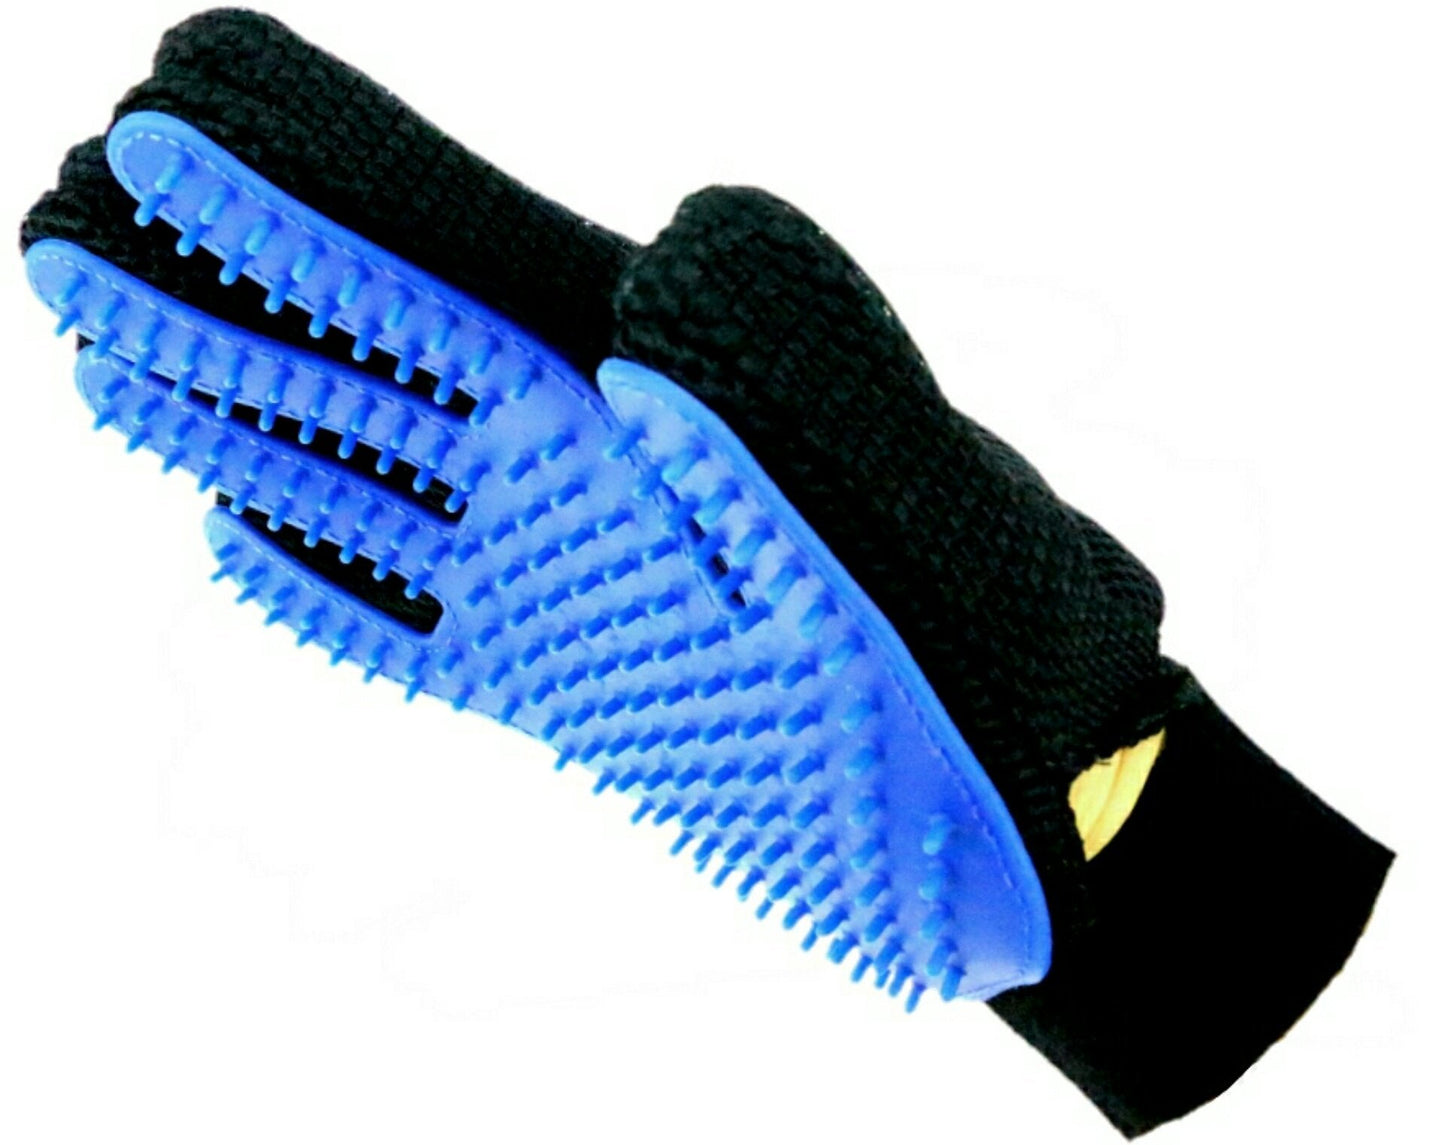 Mr. Peanut's 2 Pak HanD 259 Silicone Pins Pet Grooming Gloves